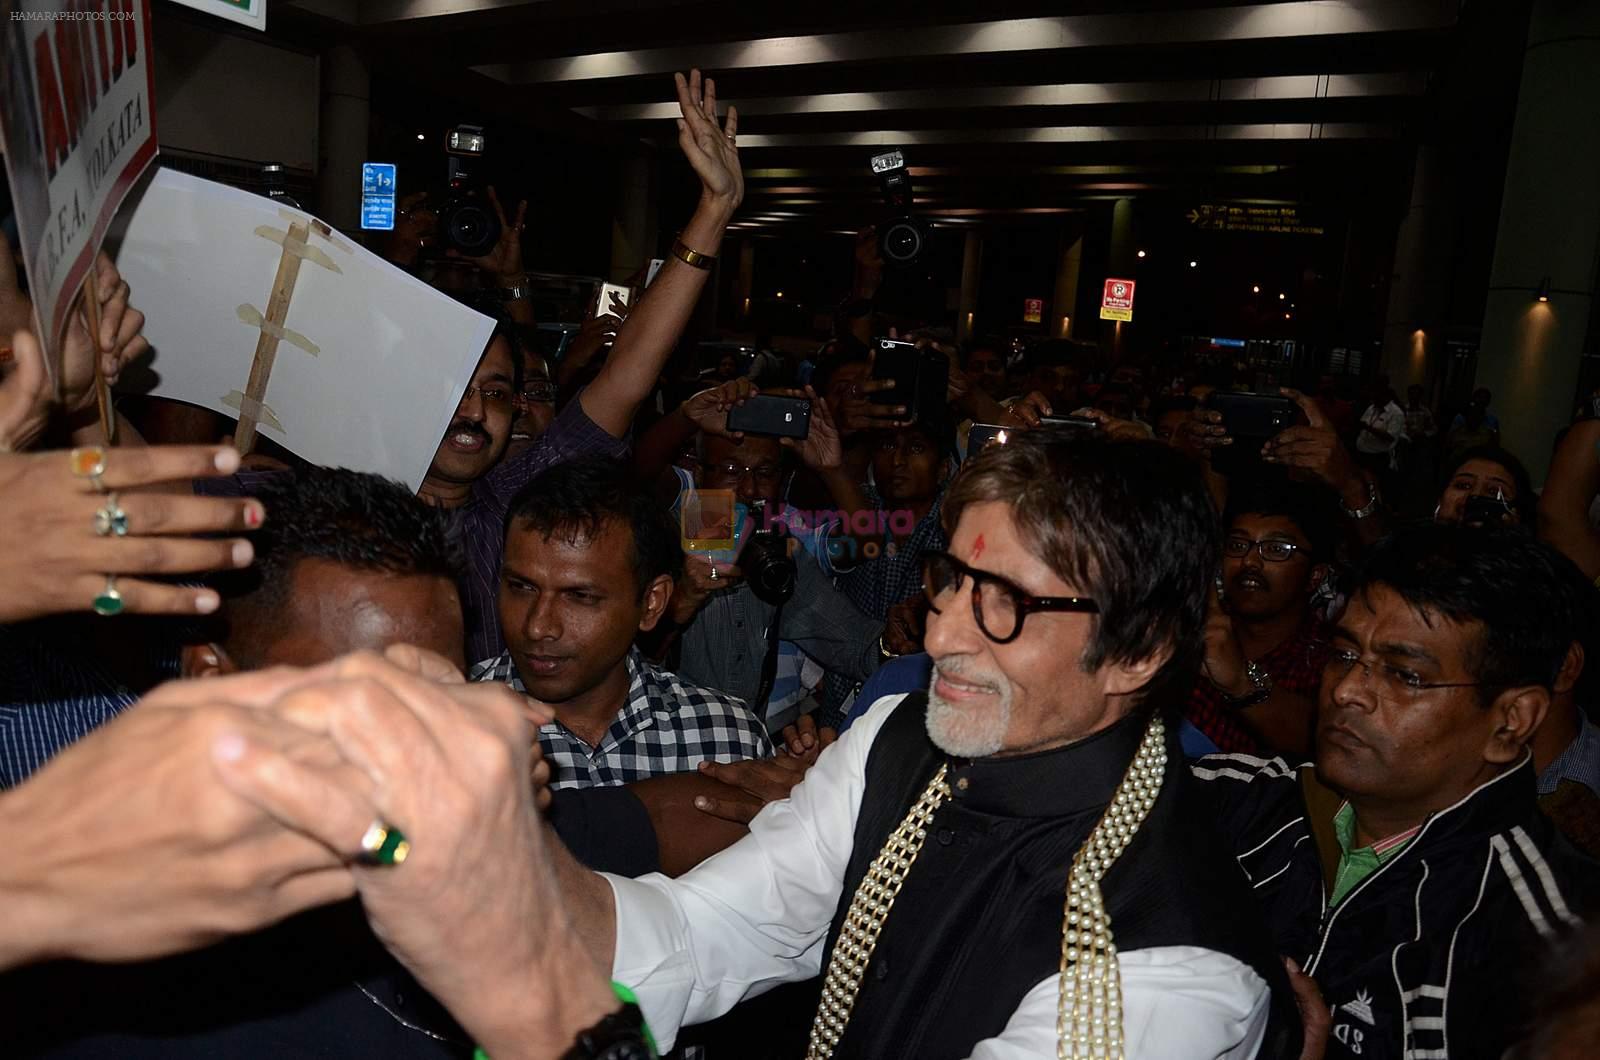 Amitabh Bachchan in Kolkata post Piku gets amazing welcome at airport by fans on 26th Nov 2015